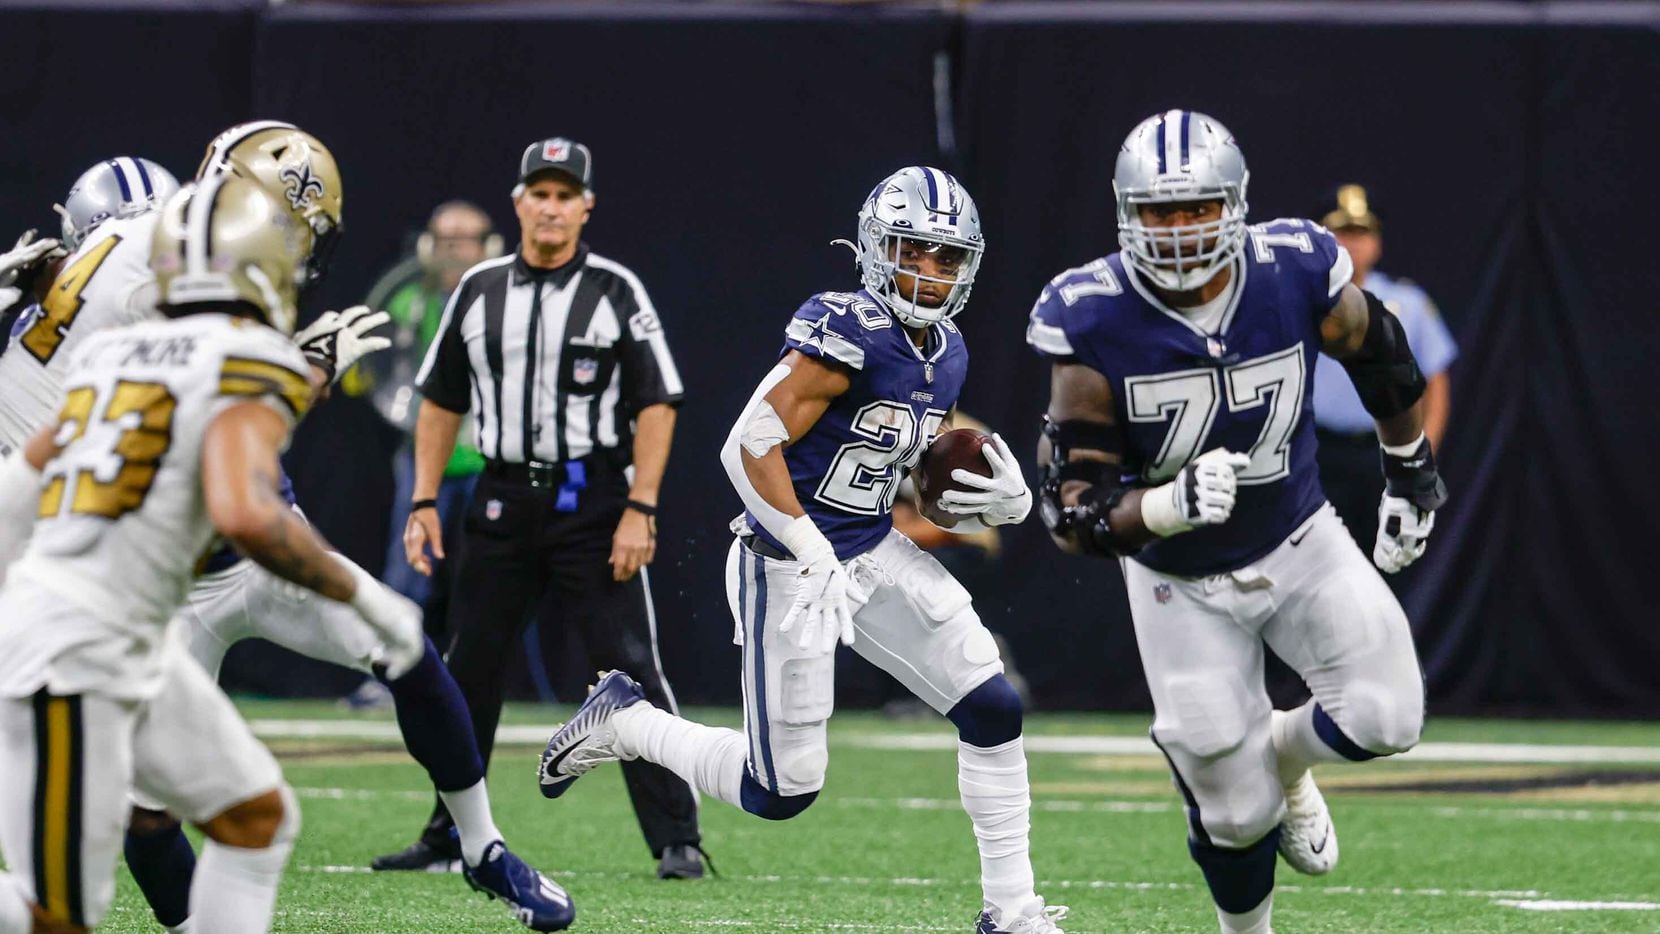 Dallas Cowboys running back Tony Pollard (20) runs with the football during the second half at the Caesars Superdome in New Orleans, Louisiana December 2, 2021.